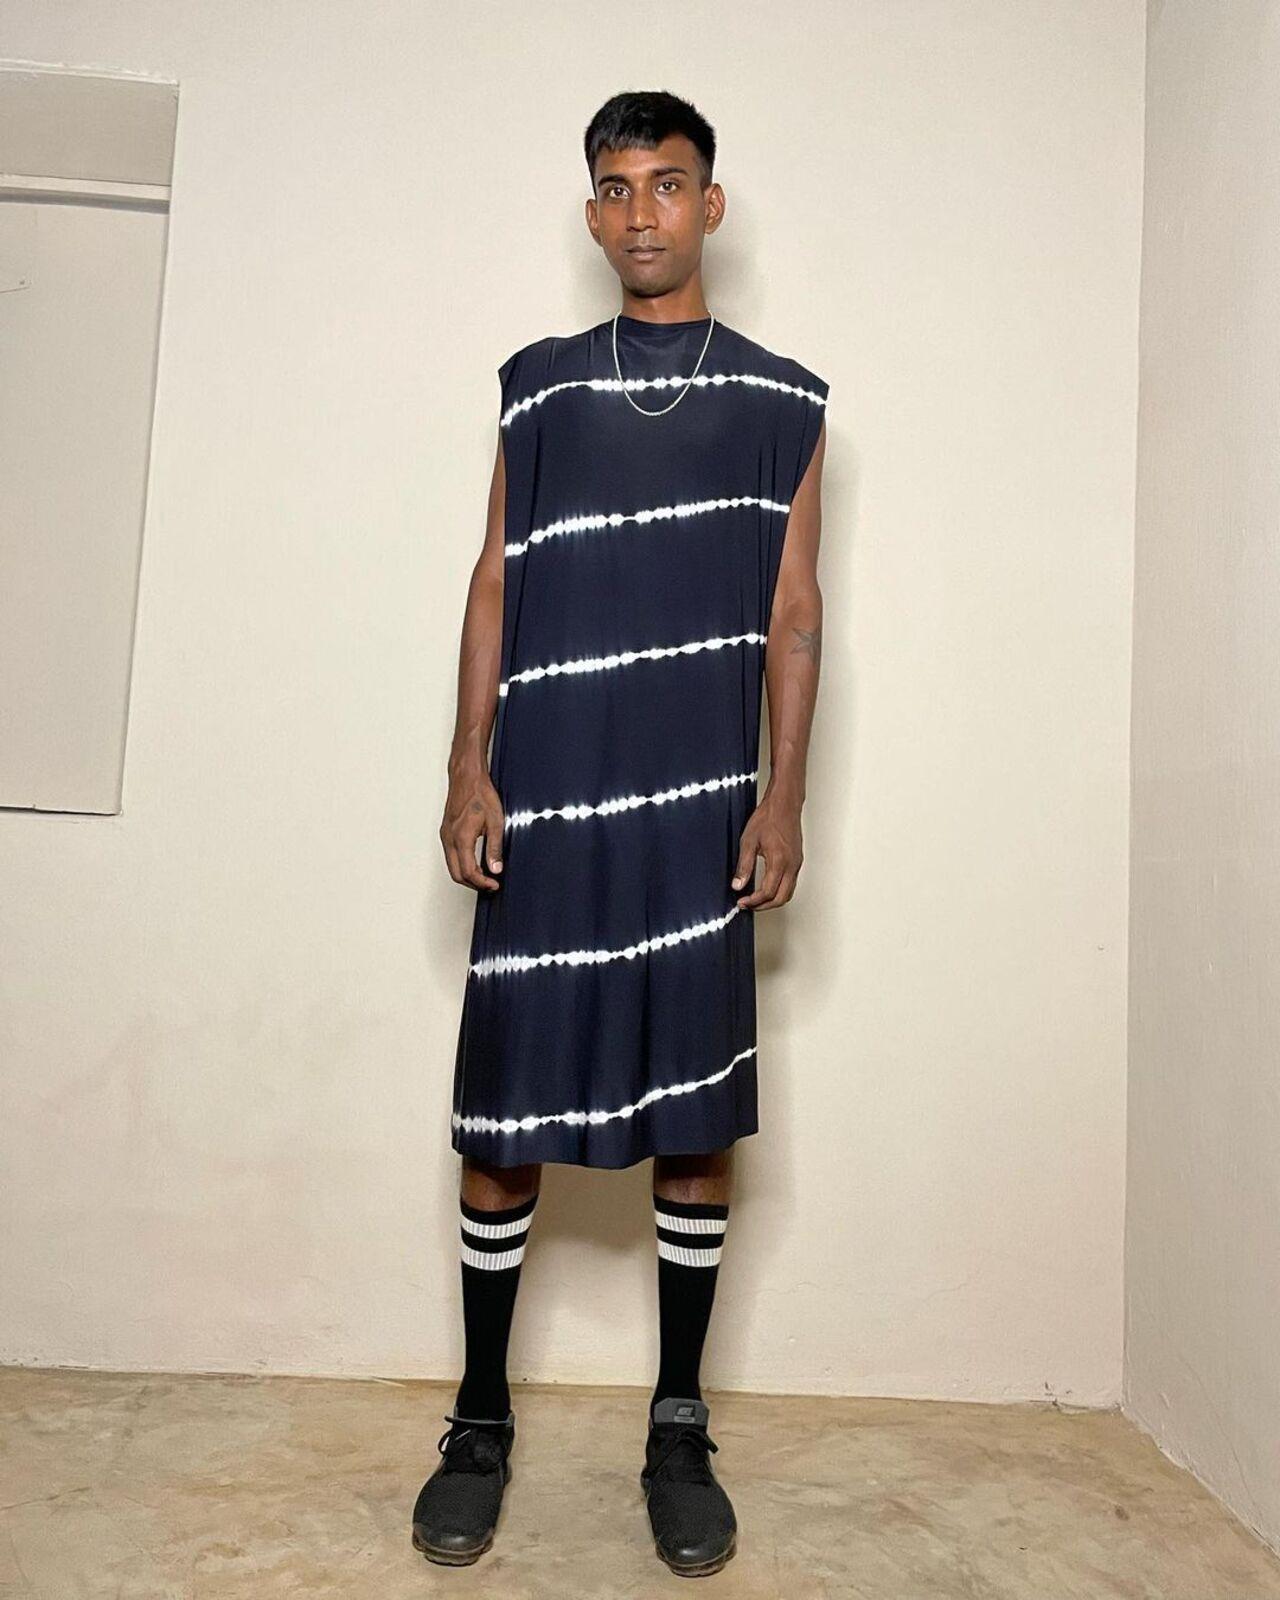 Moral Science presents gender-neutral, workwear-inspired attire through its simplistic and functional designs. From handcrafted adornments to spirited apparel, the brand offers a comprehensive range. This straight-cut dress with pulled up socks perfectly captures its eclectic and playful appeal